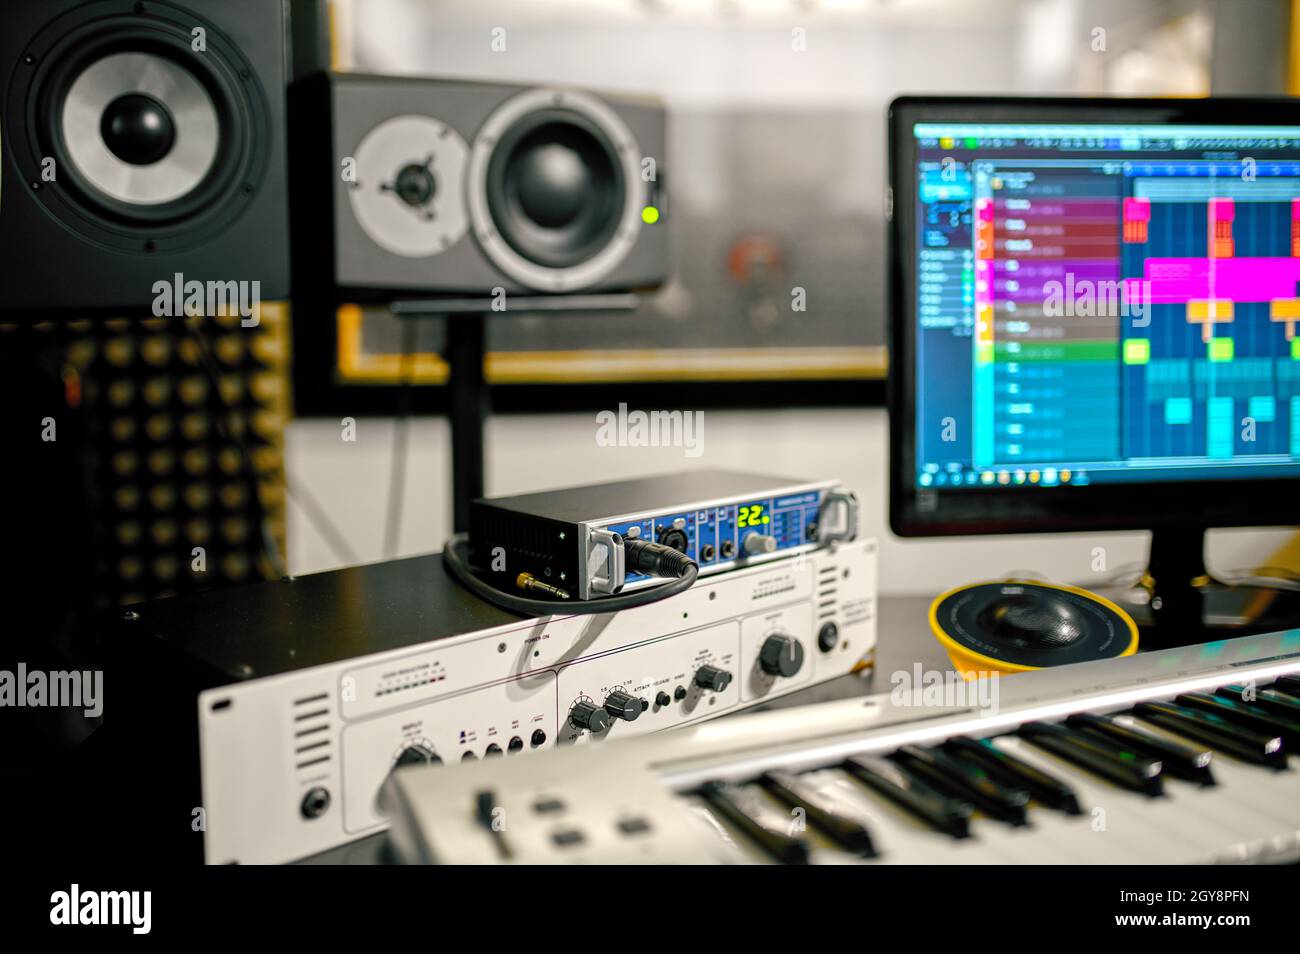 Synthesizer closeup, recording studio equipment on background. Audio speakers, mixer and monitor, sound engineer workplace Stock Photo